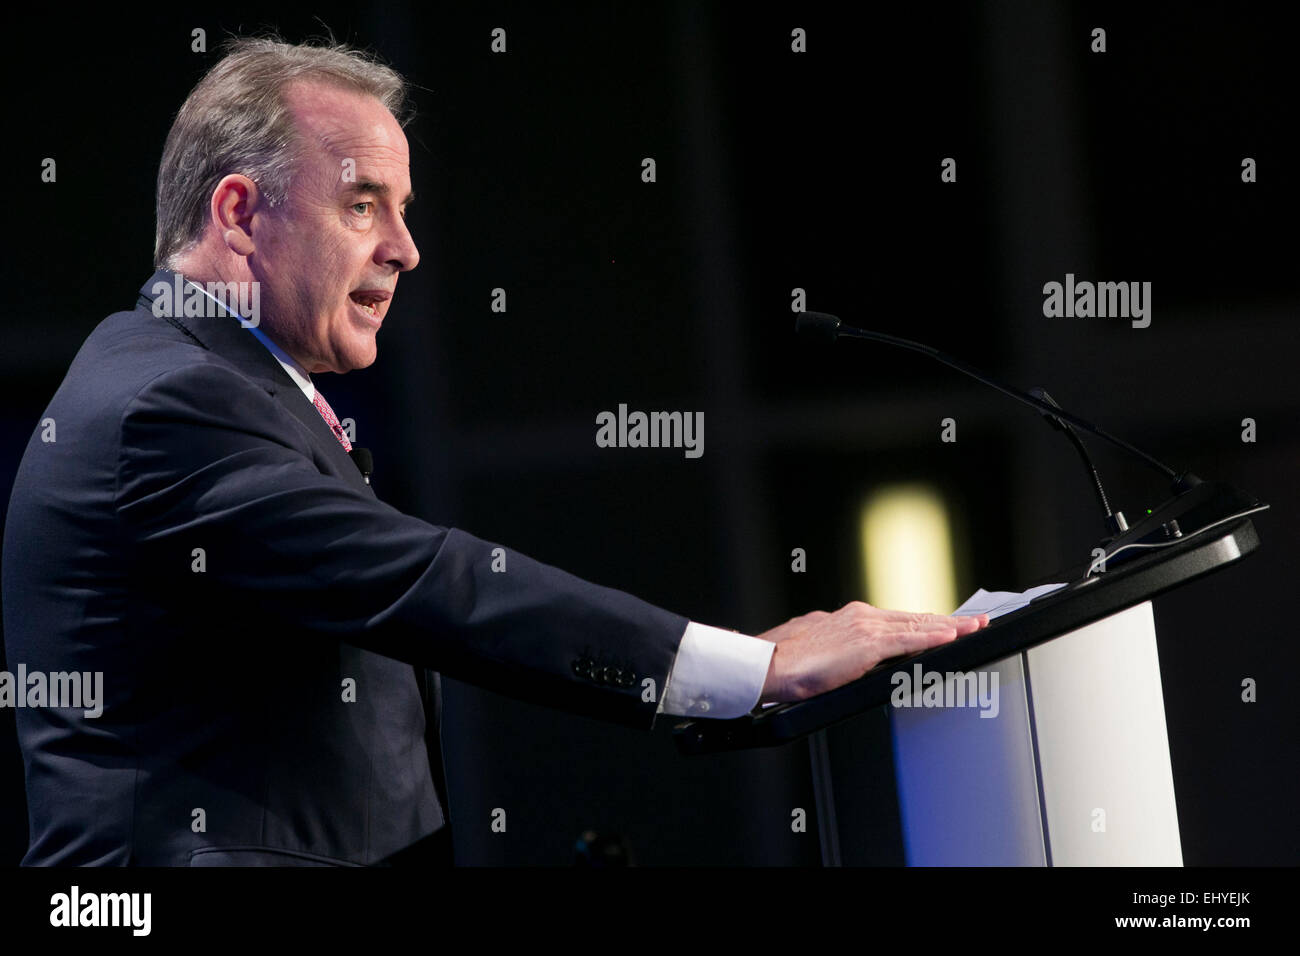 Washington, DC, USA. 17th Mar, 2015. James Hogan, President and CEO, Etihad Airways, speaks at the 14th annual U.S. Chamber Of Commerce Foundation Aviation Summit in downtown Washington, D.C., on March 17, 2015. Credit:  Kristoffer Tripplaar/Alamy Live News Stock Photo